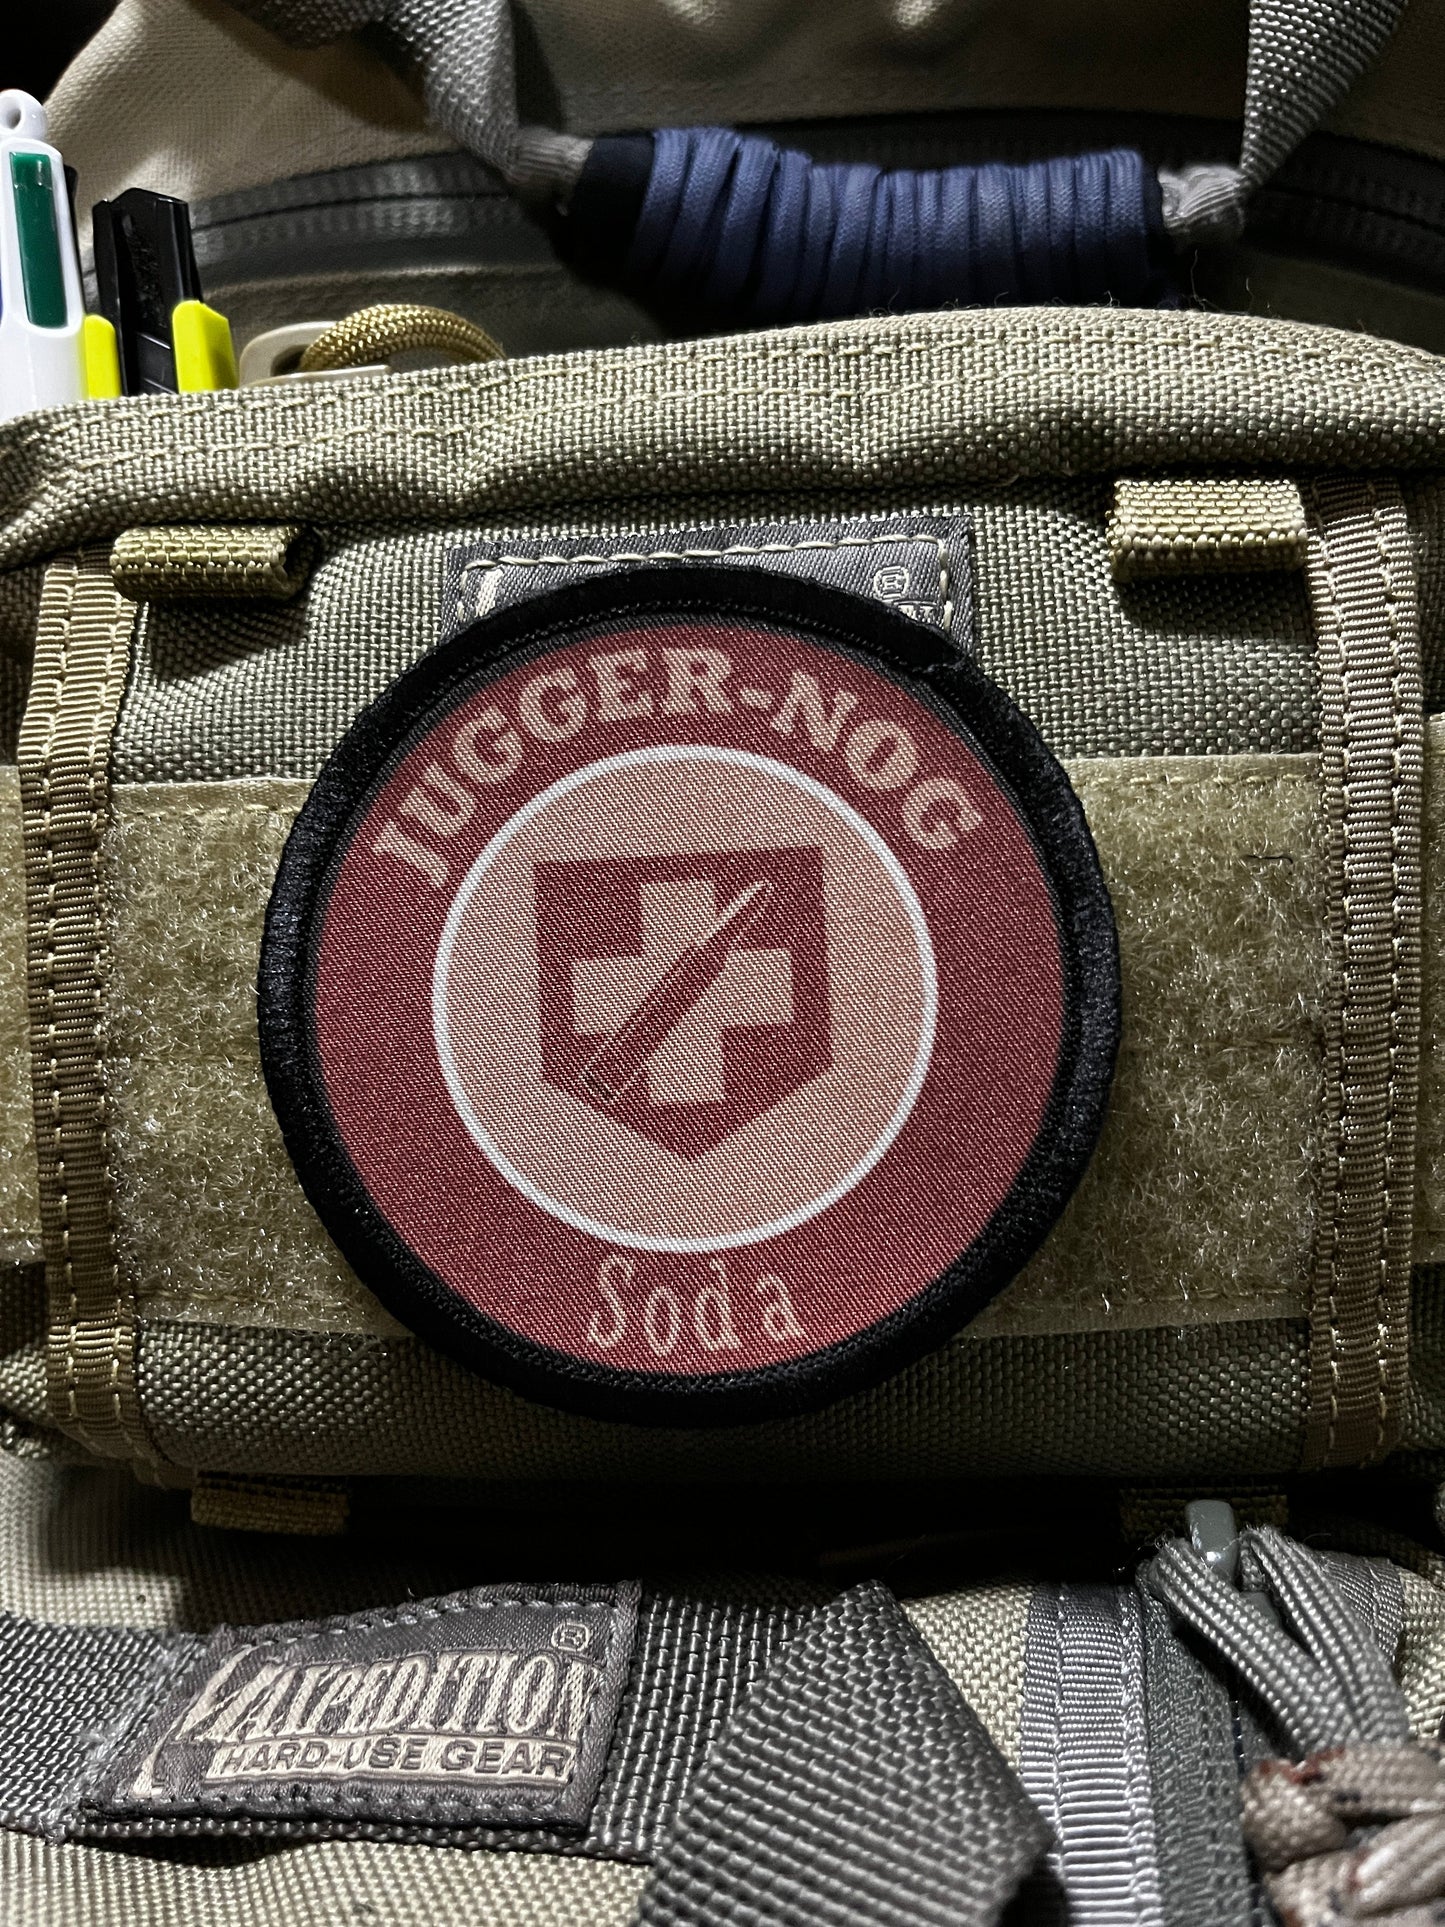 3" Jugger-Nog Soda Morale Patch Morale Patches Redheaded T Shirts 